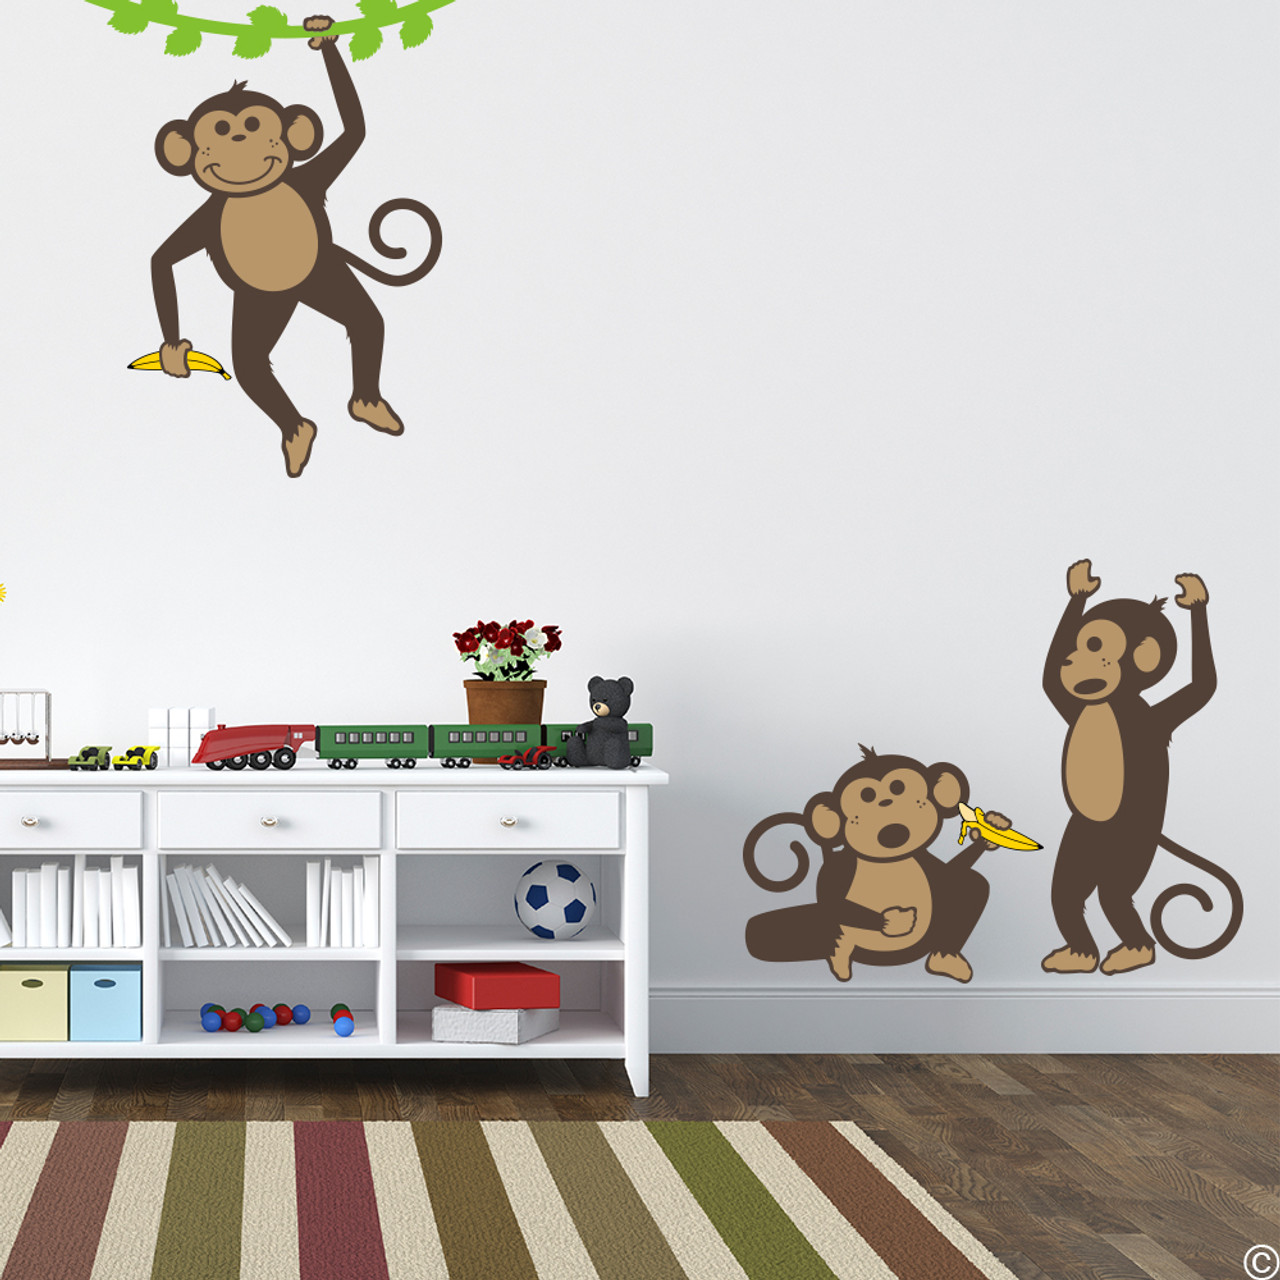 Vinyl wall decals of three monkeys holding bananas and playing .